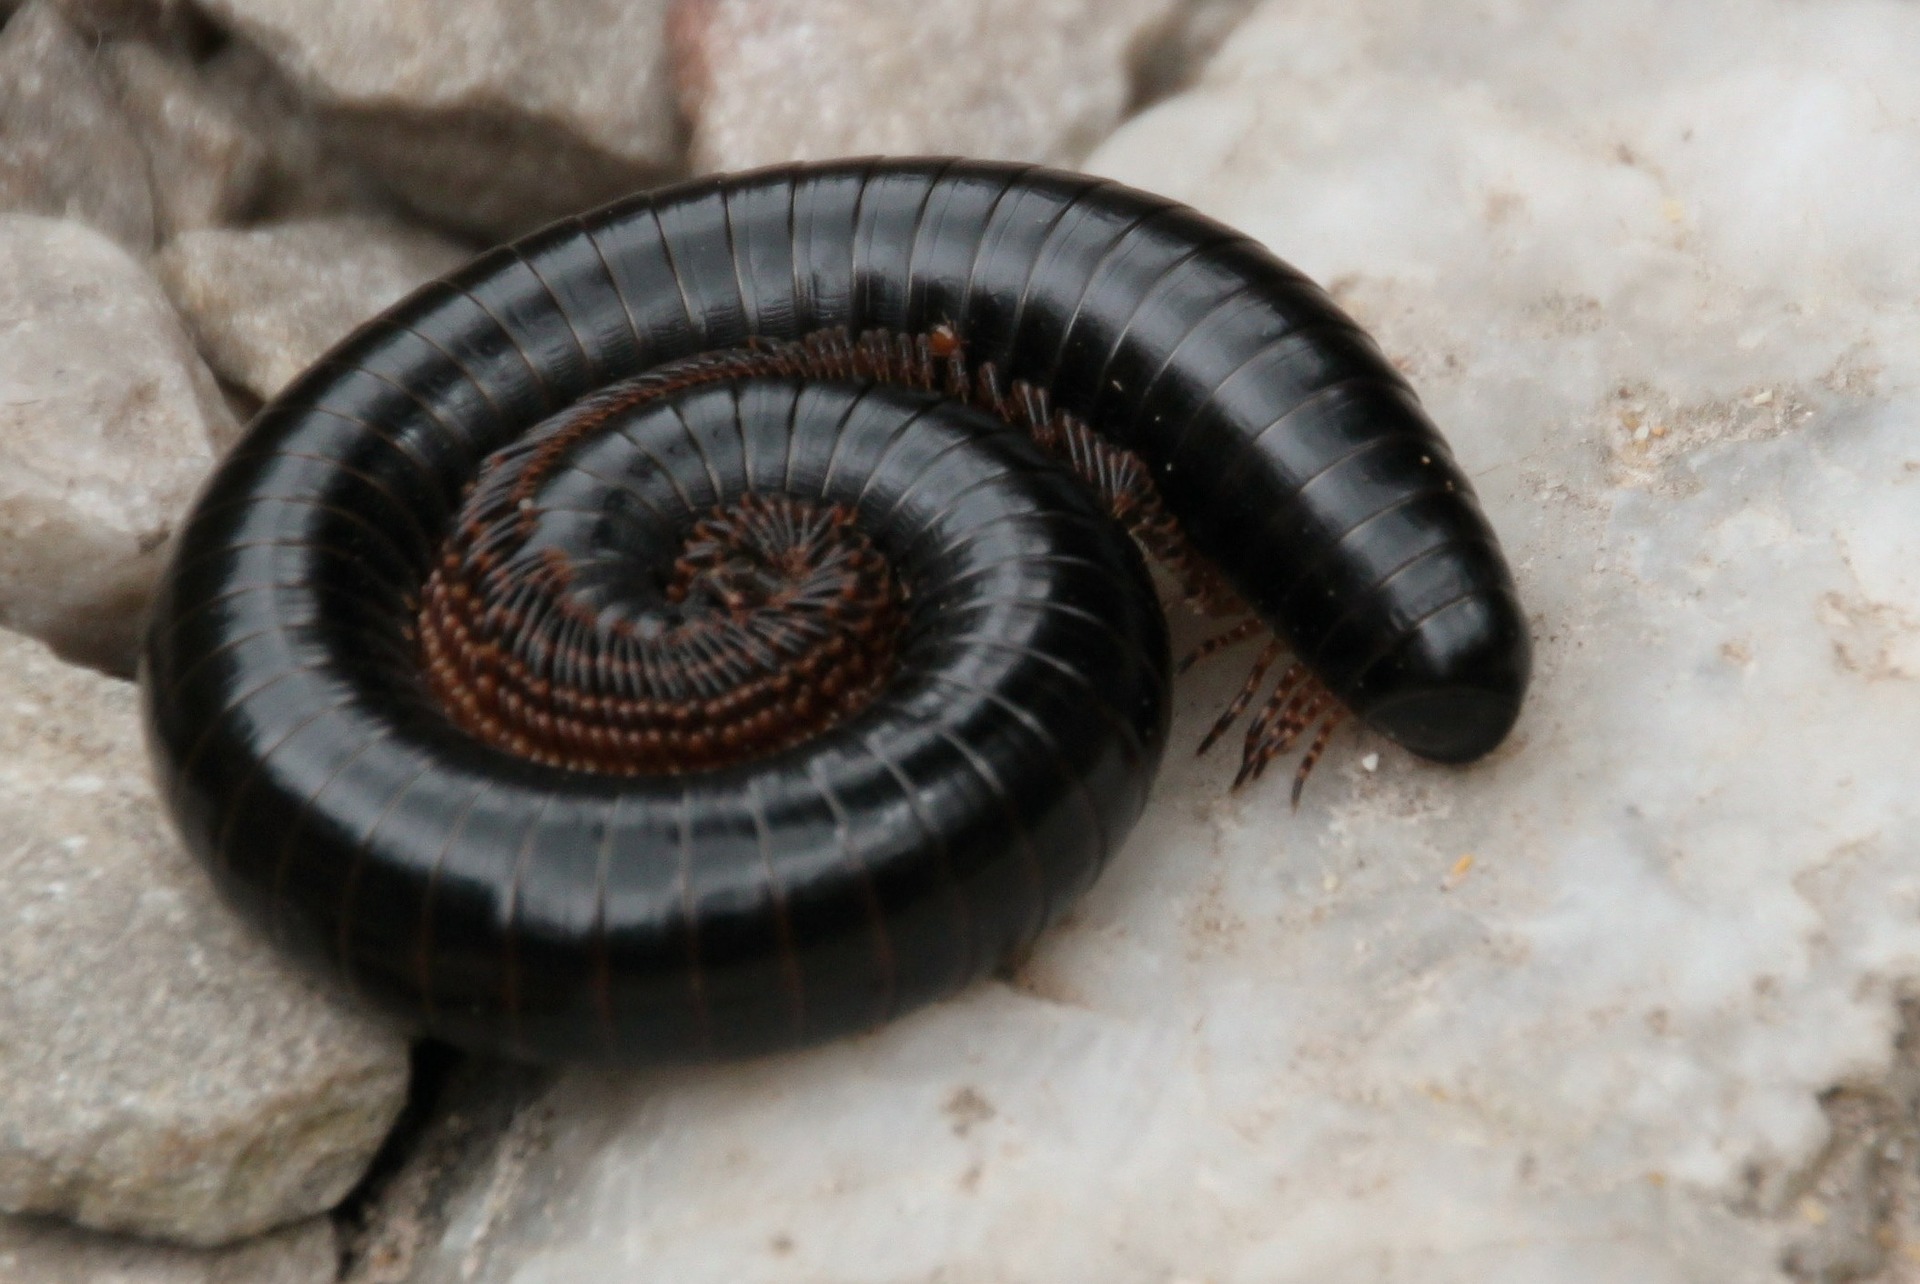 An african giant millipede sitting on some rocks